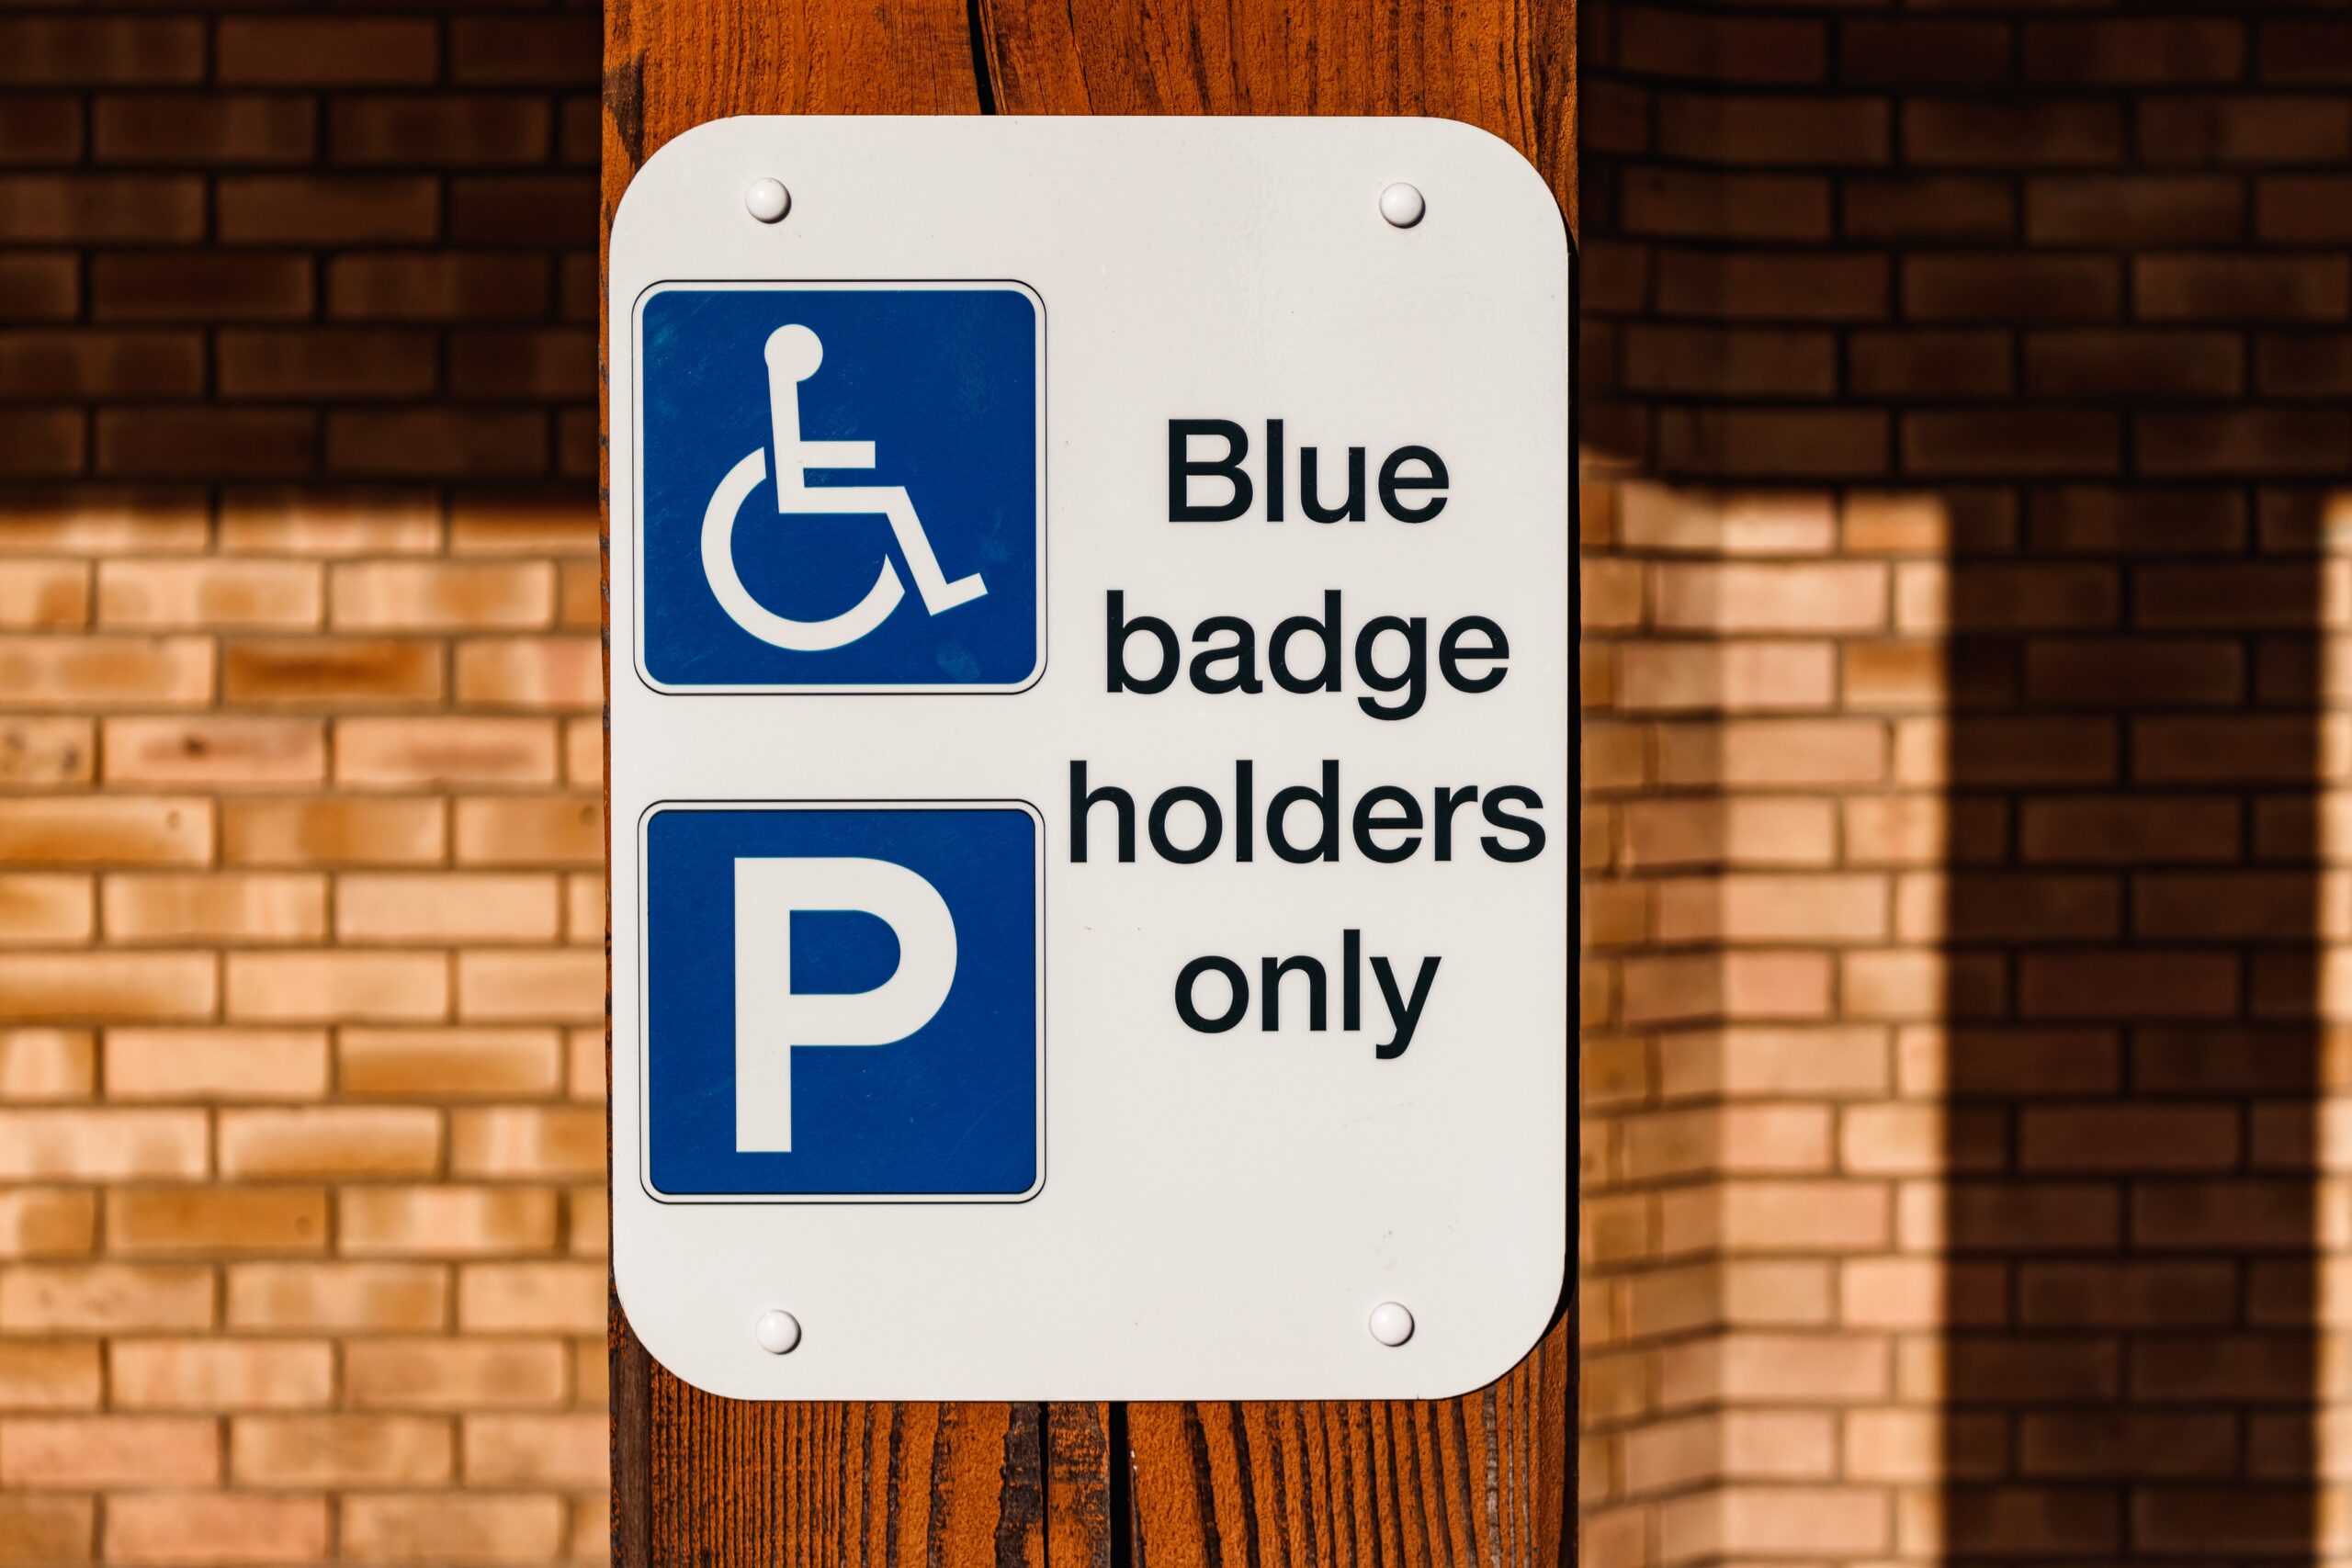 'Blue badge holders only' sign